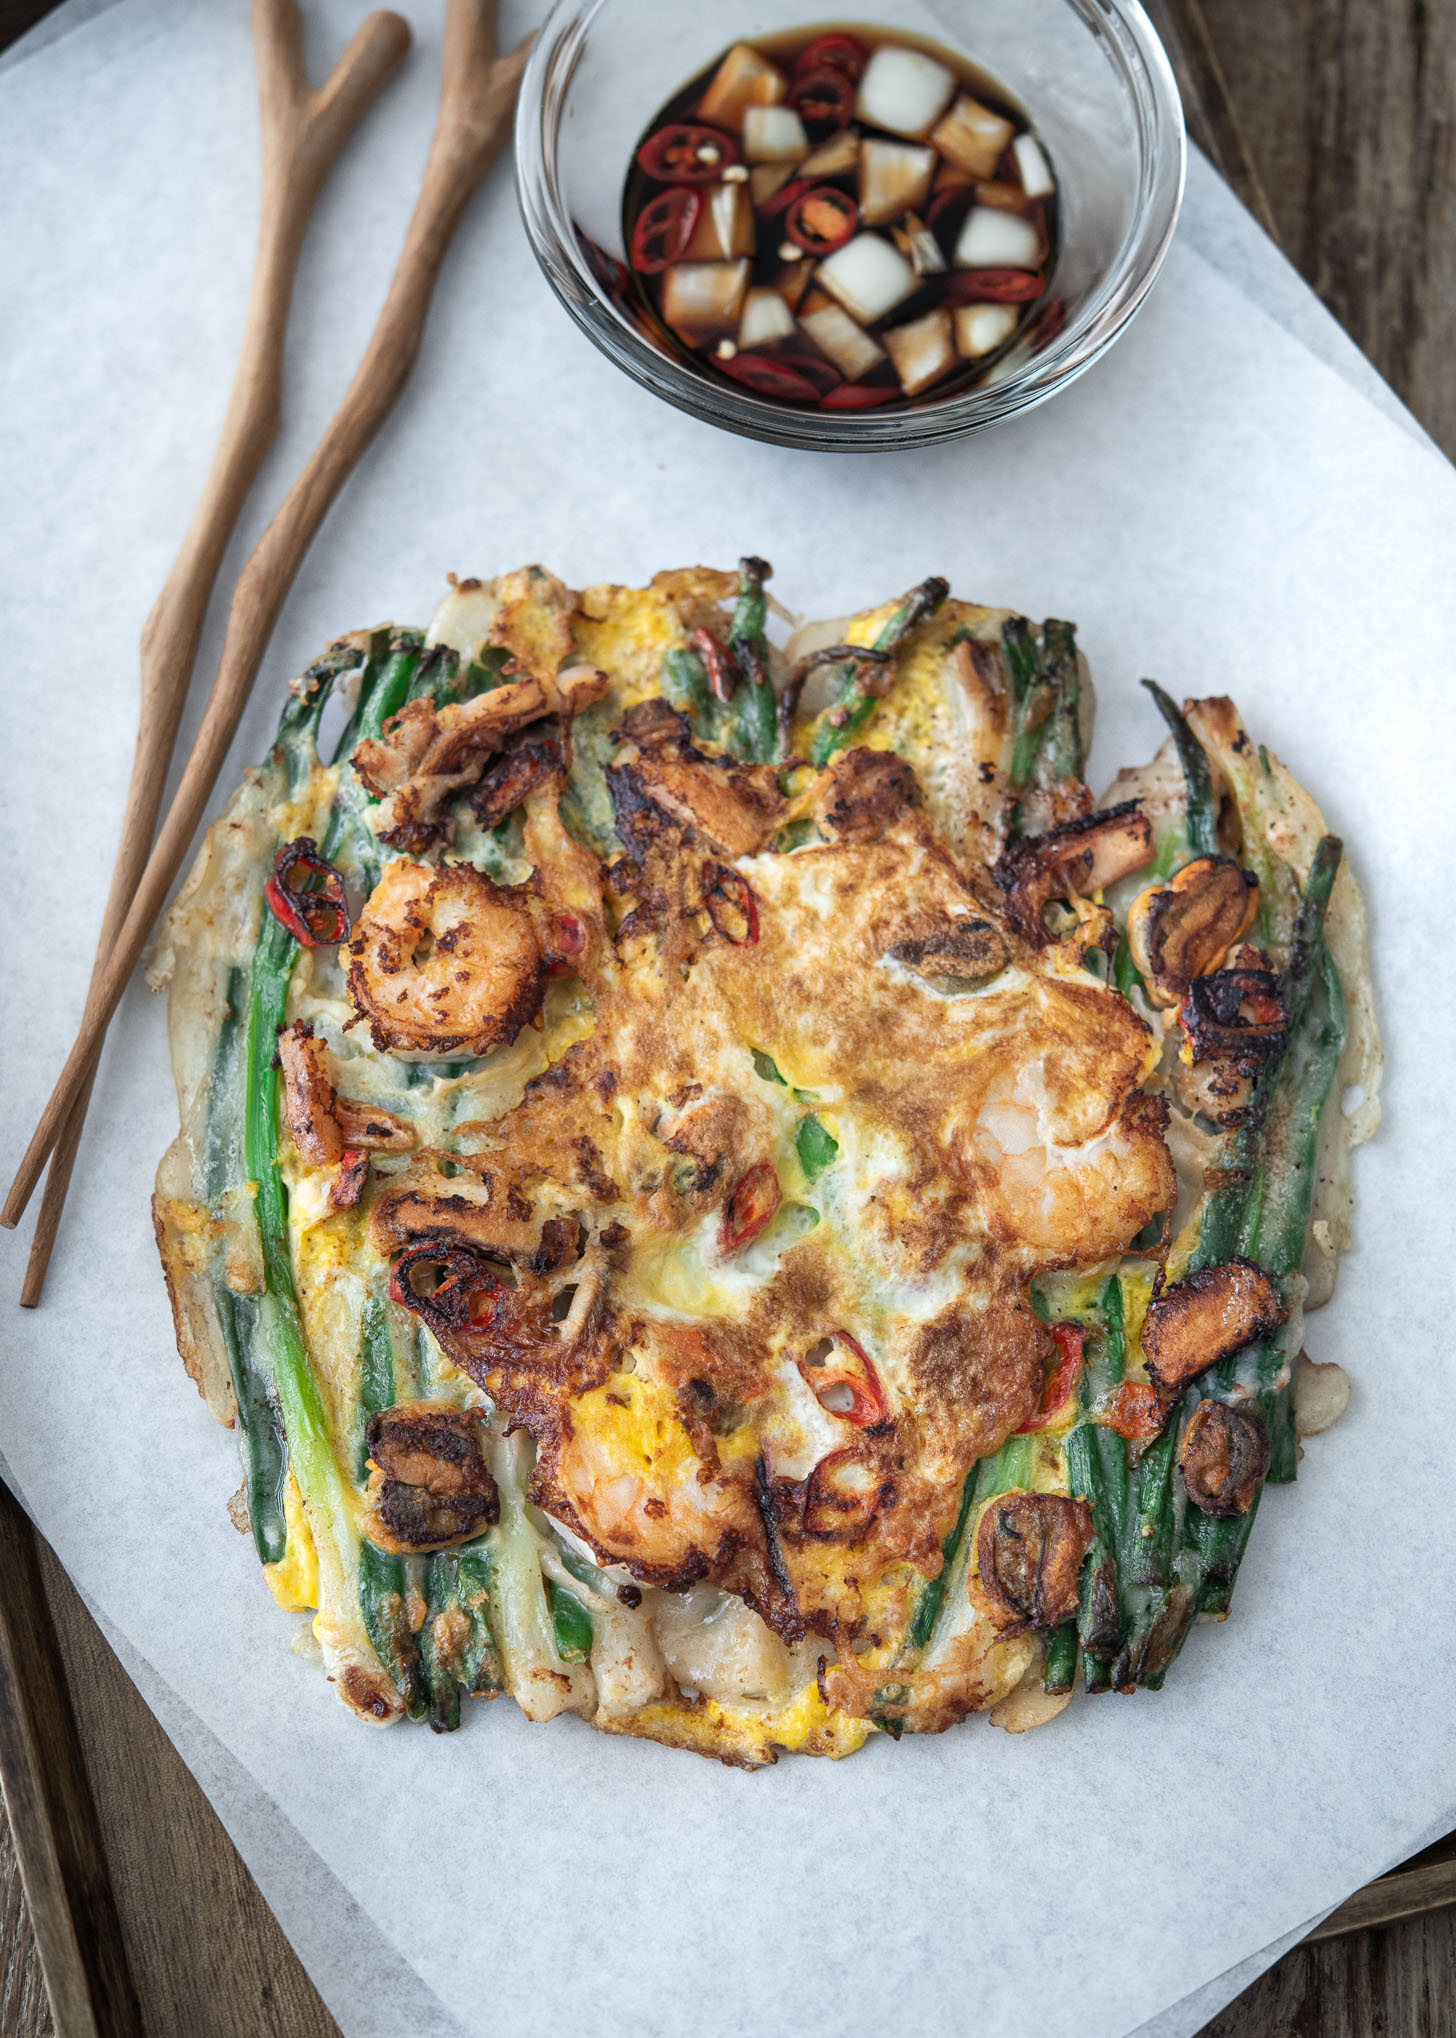 Korean scallion pancake, pajeon, made with seafood served with dipping sauce